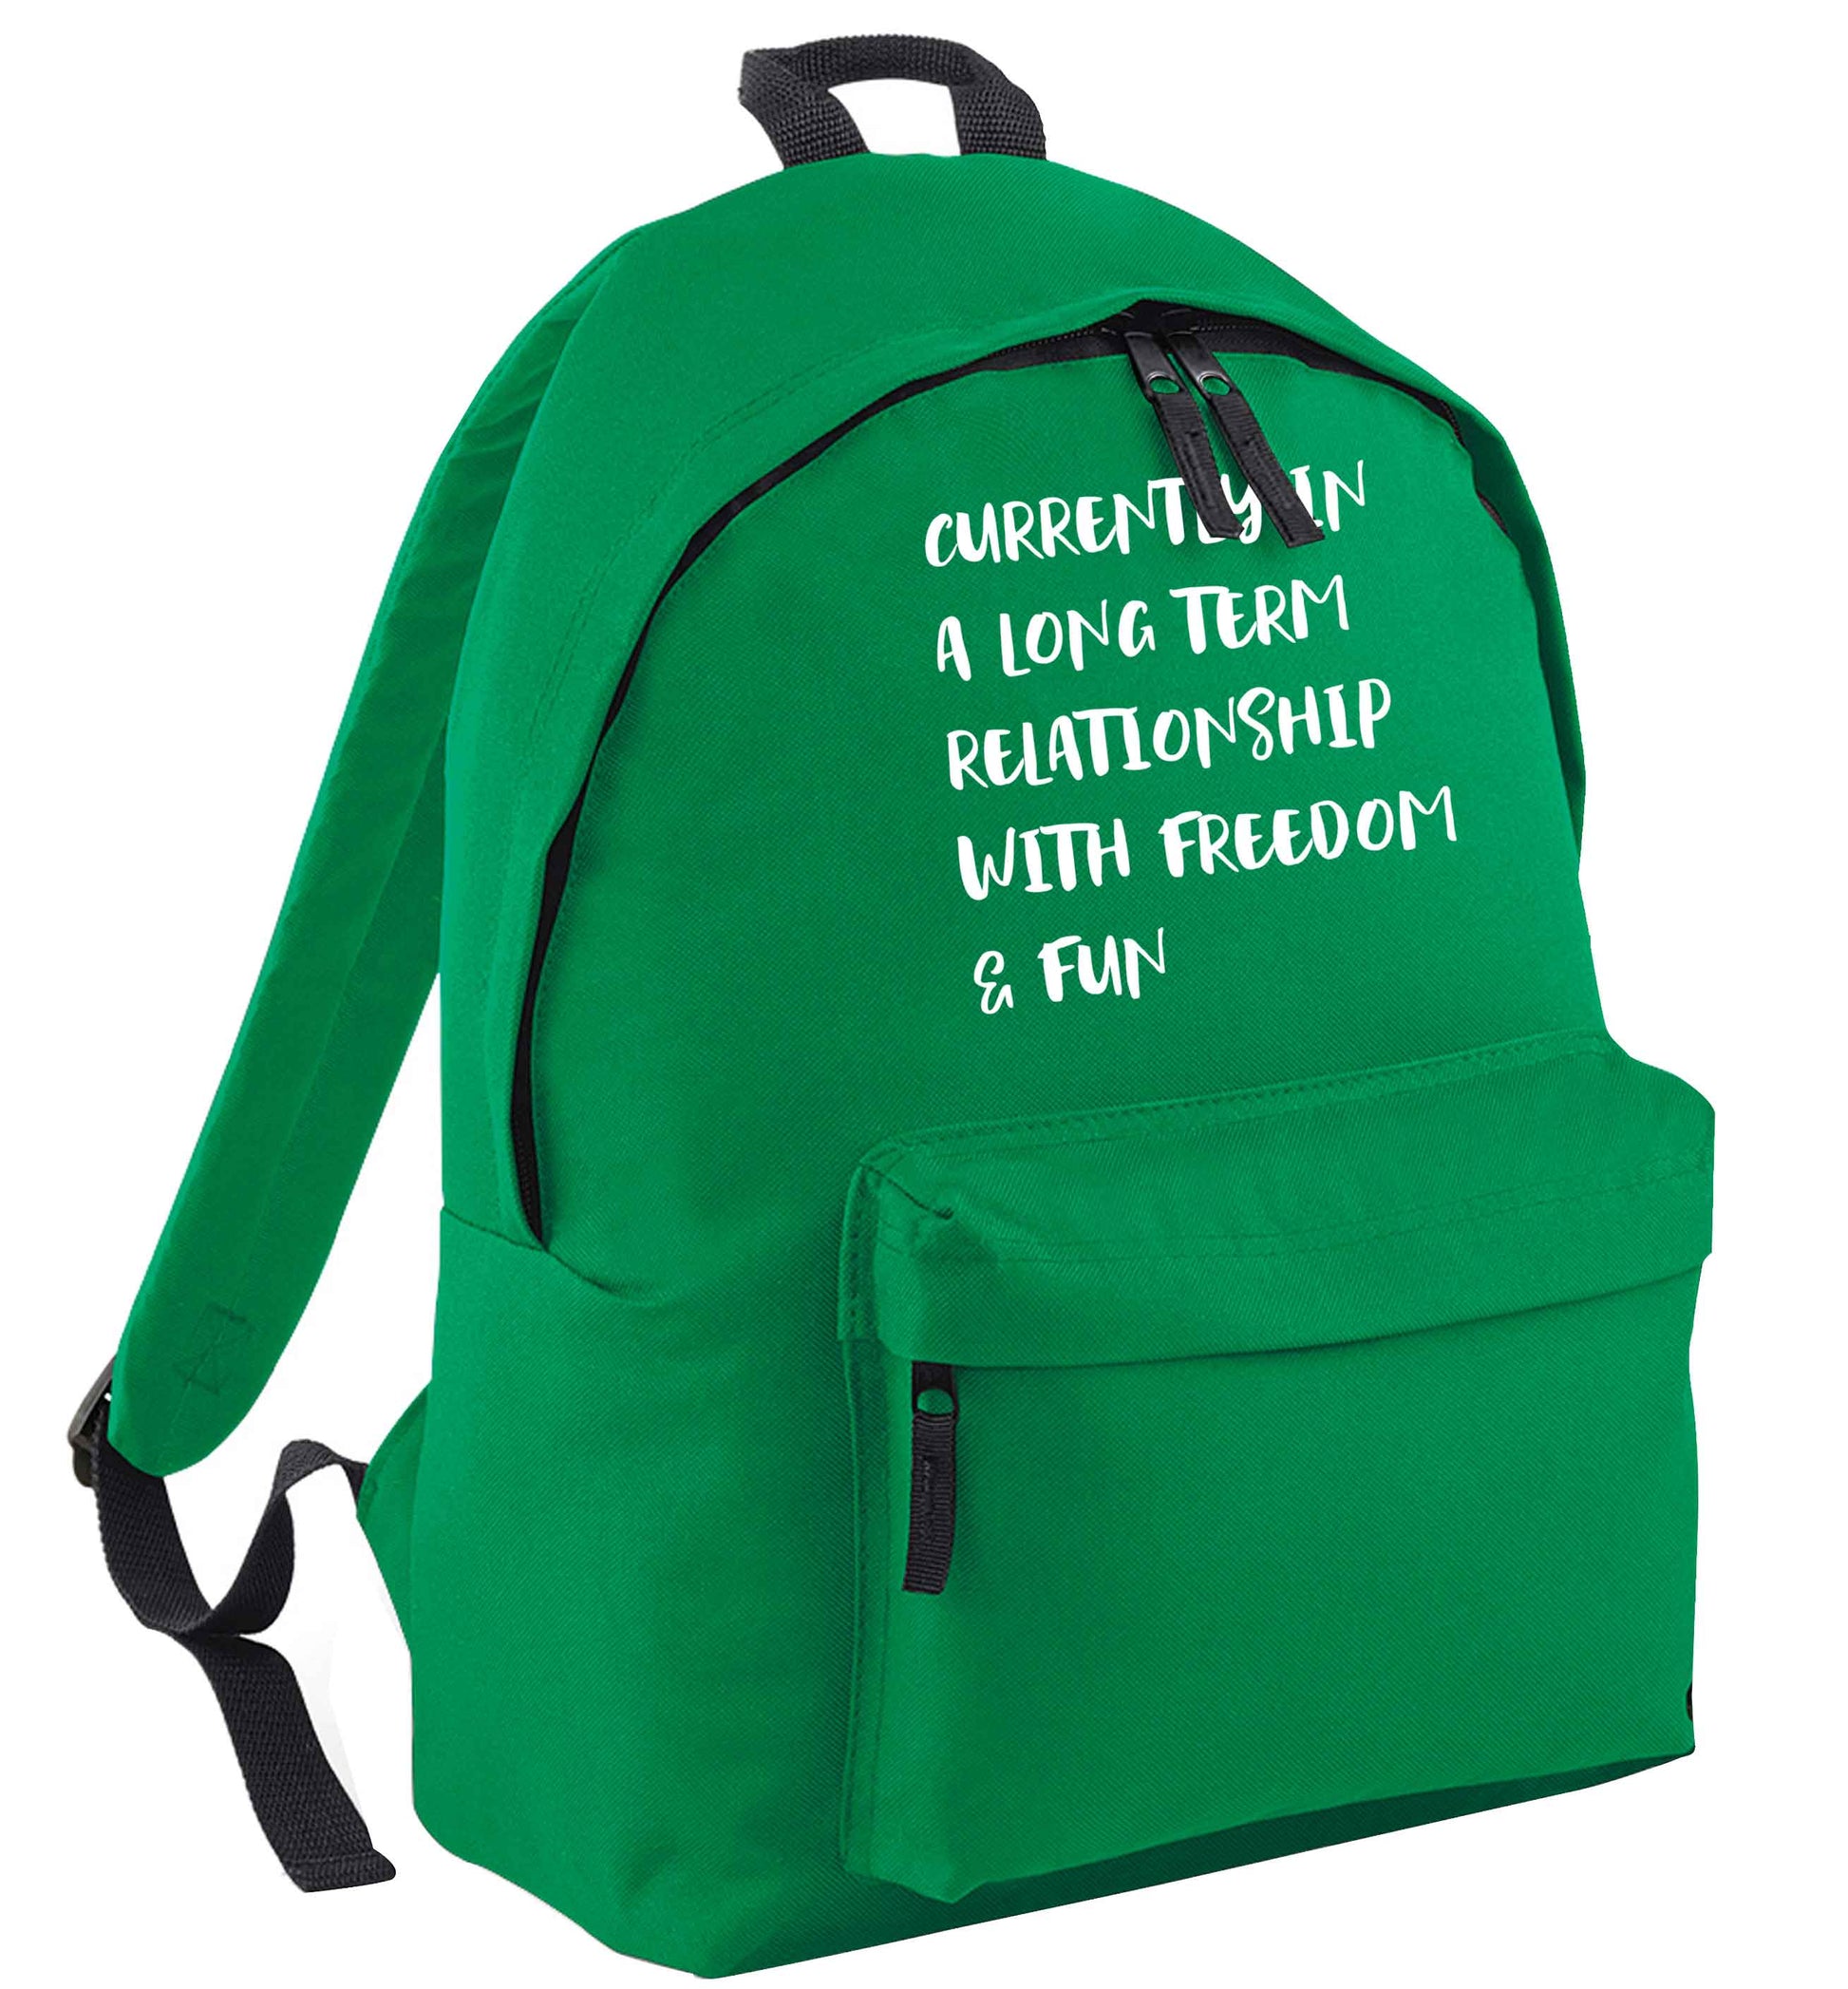 Currently in a long term relationship with freedom and fun green adults backpack